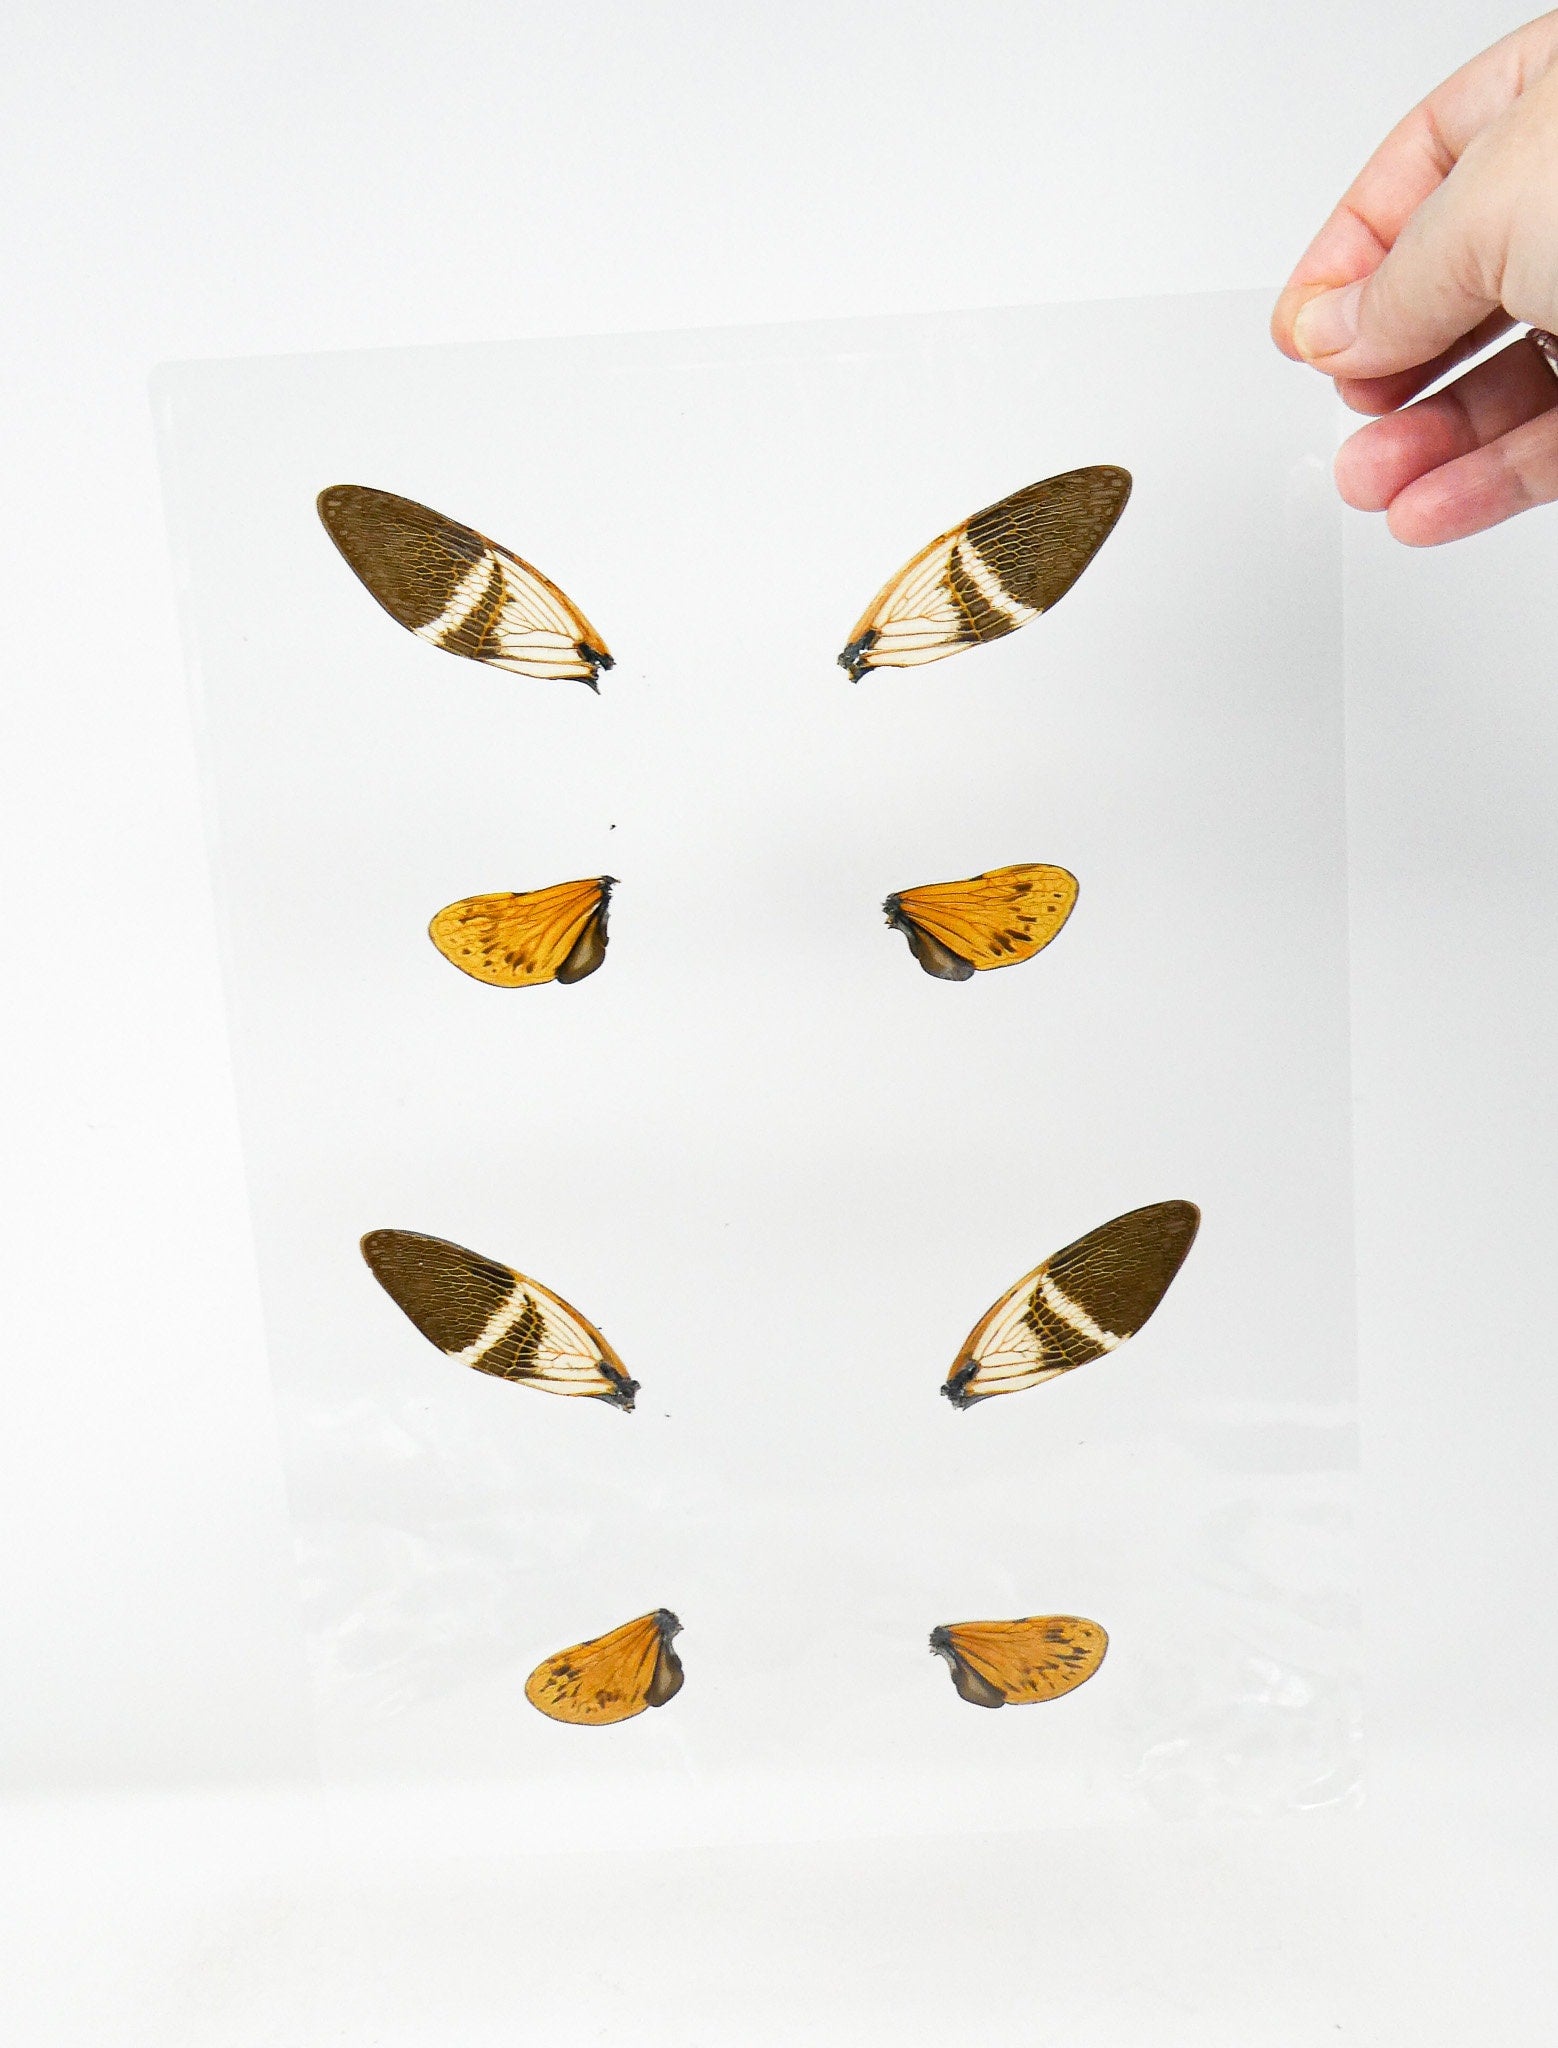 Laminated Coconut Cicadas Wings for Art and Craft Projects, Ethically Sourced Real Specimens